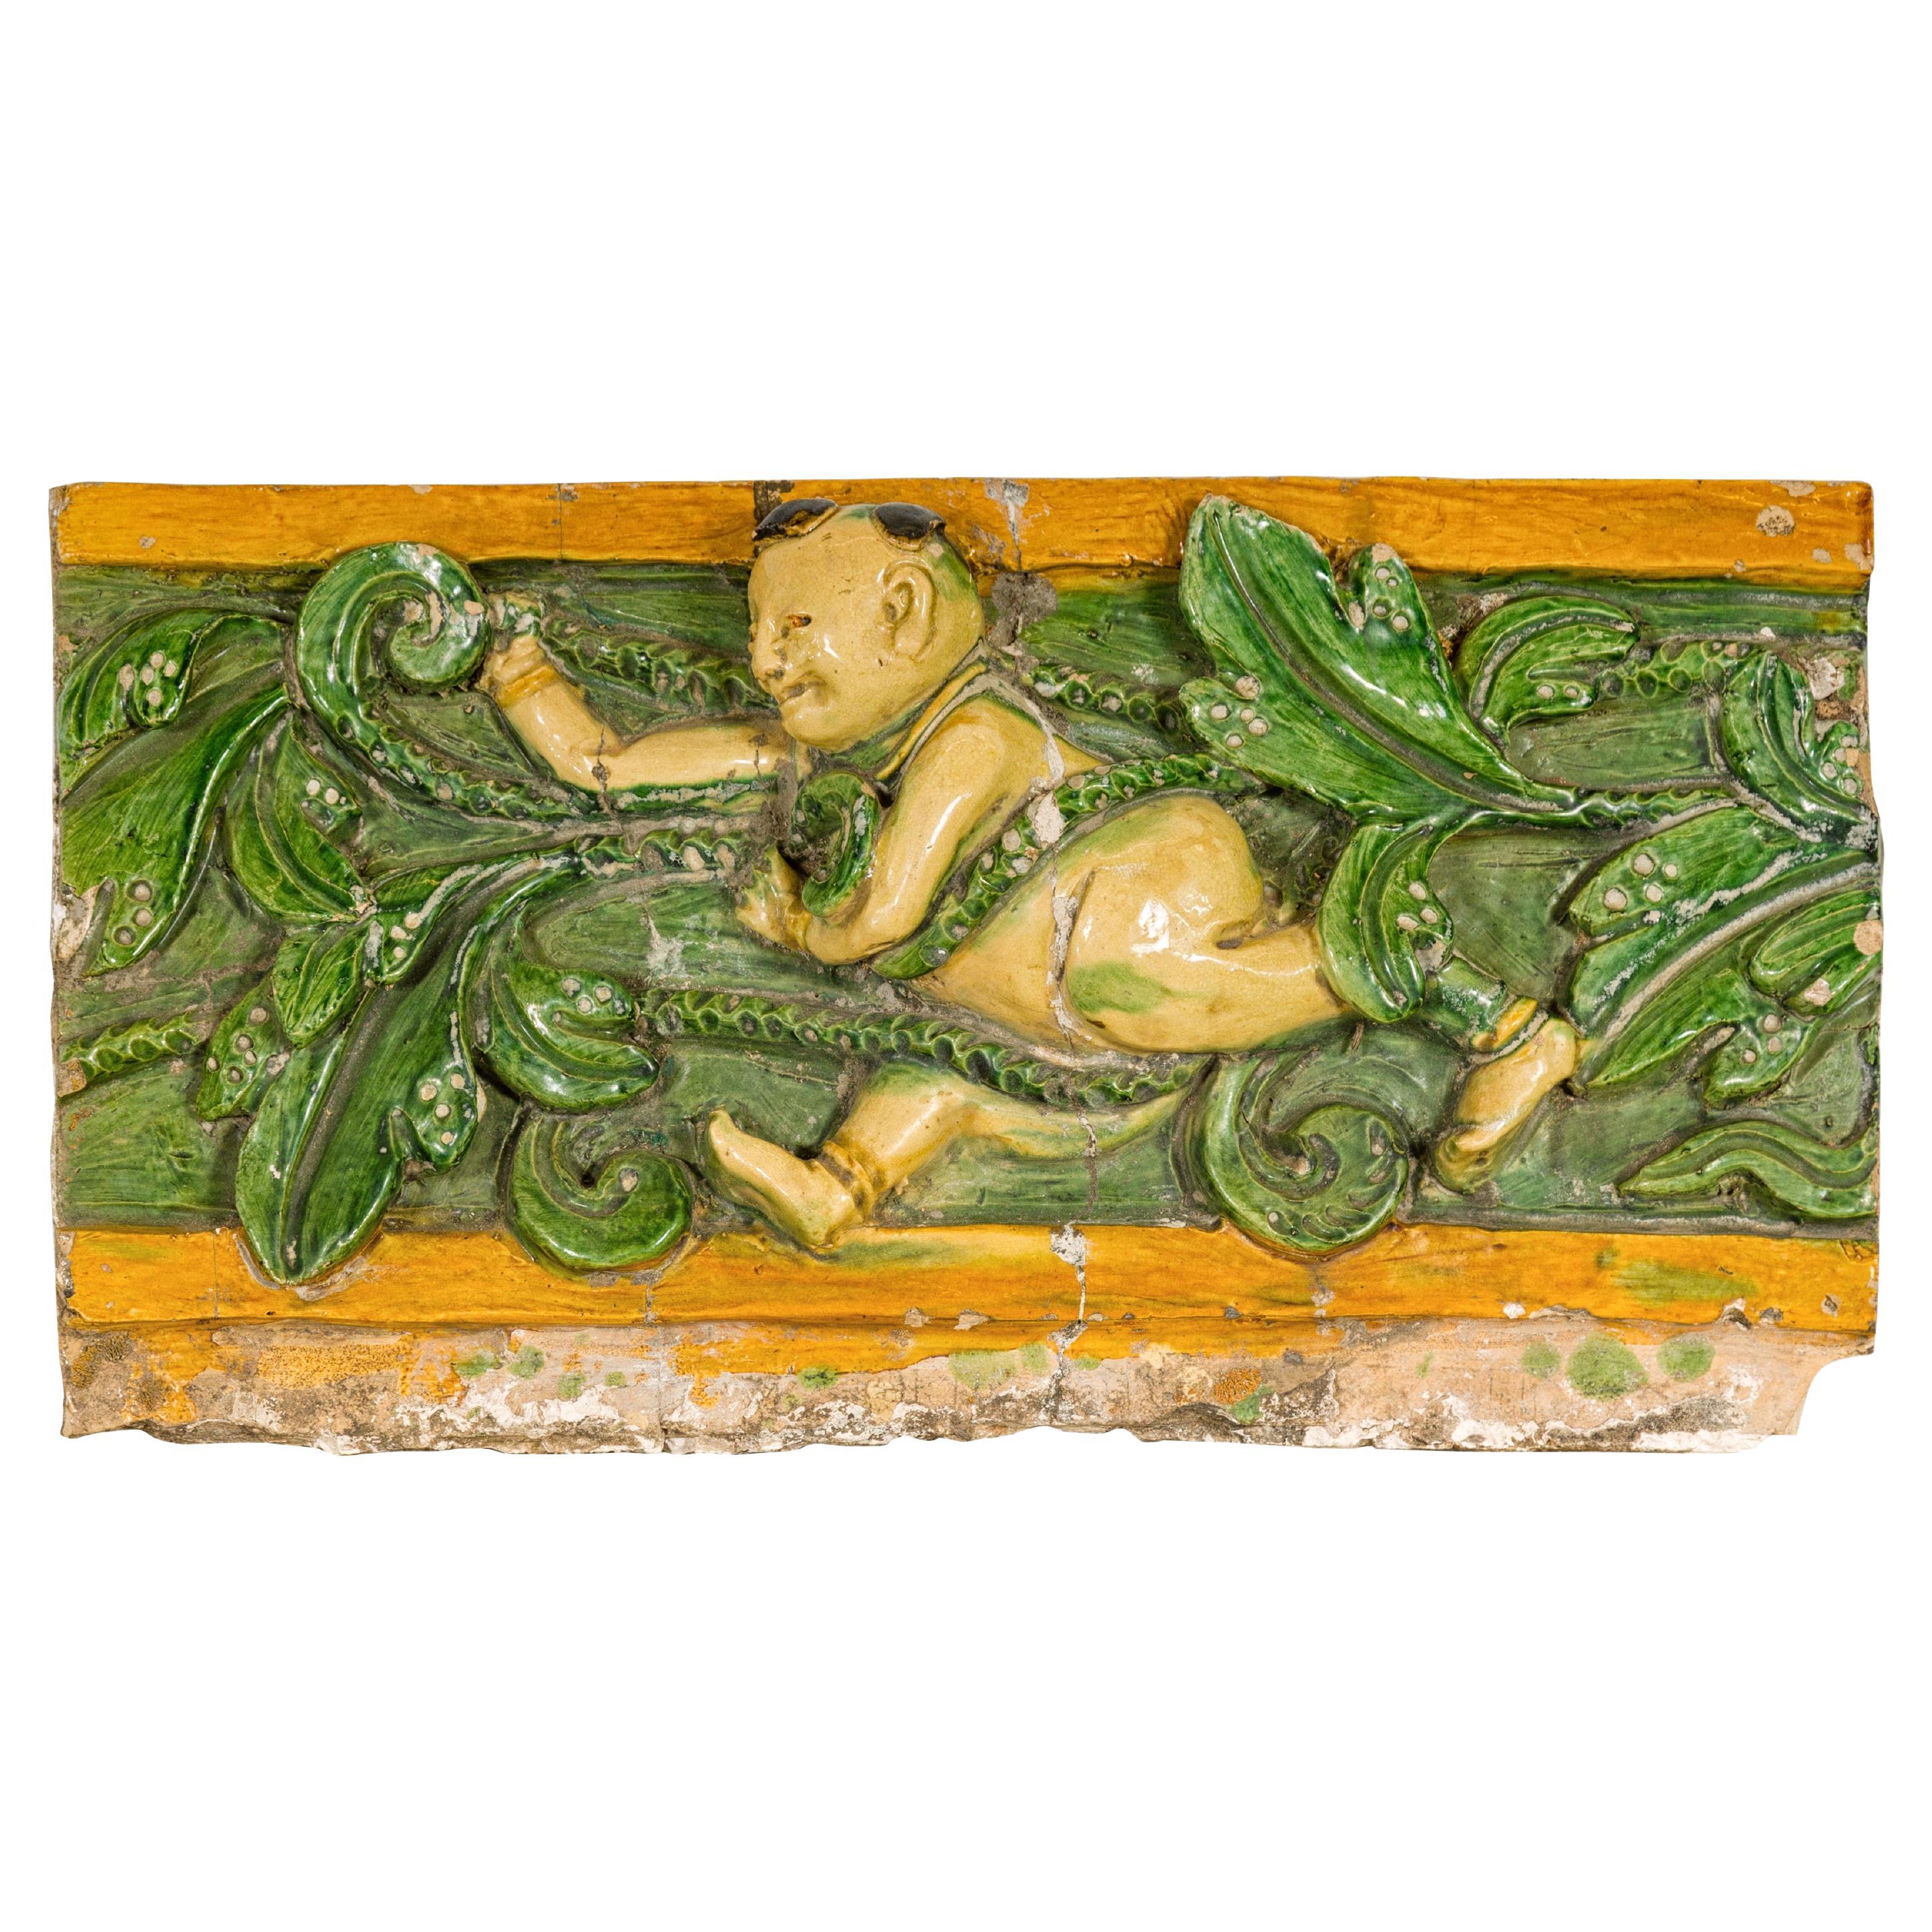 Qing Dynasty Tricolor Roof Fragment from a Temple Depicting a Boy Amidst Leaves